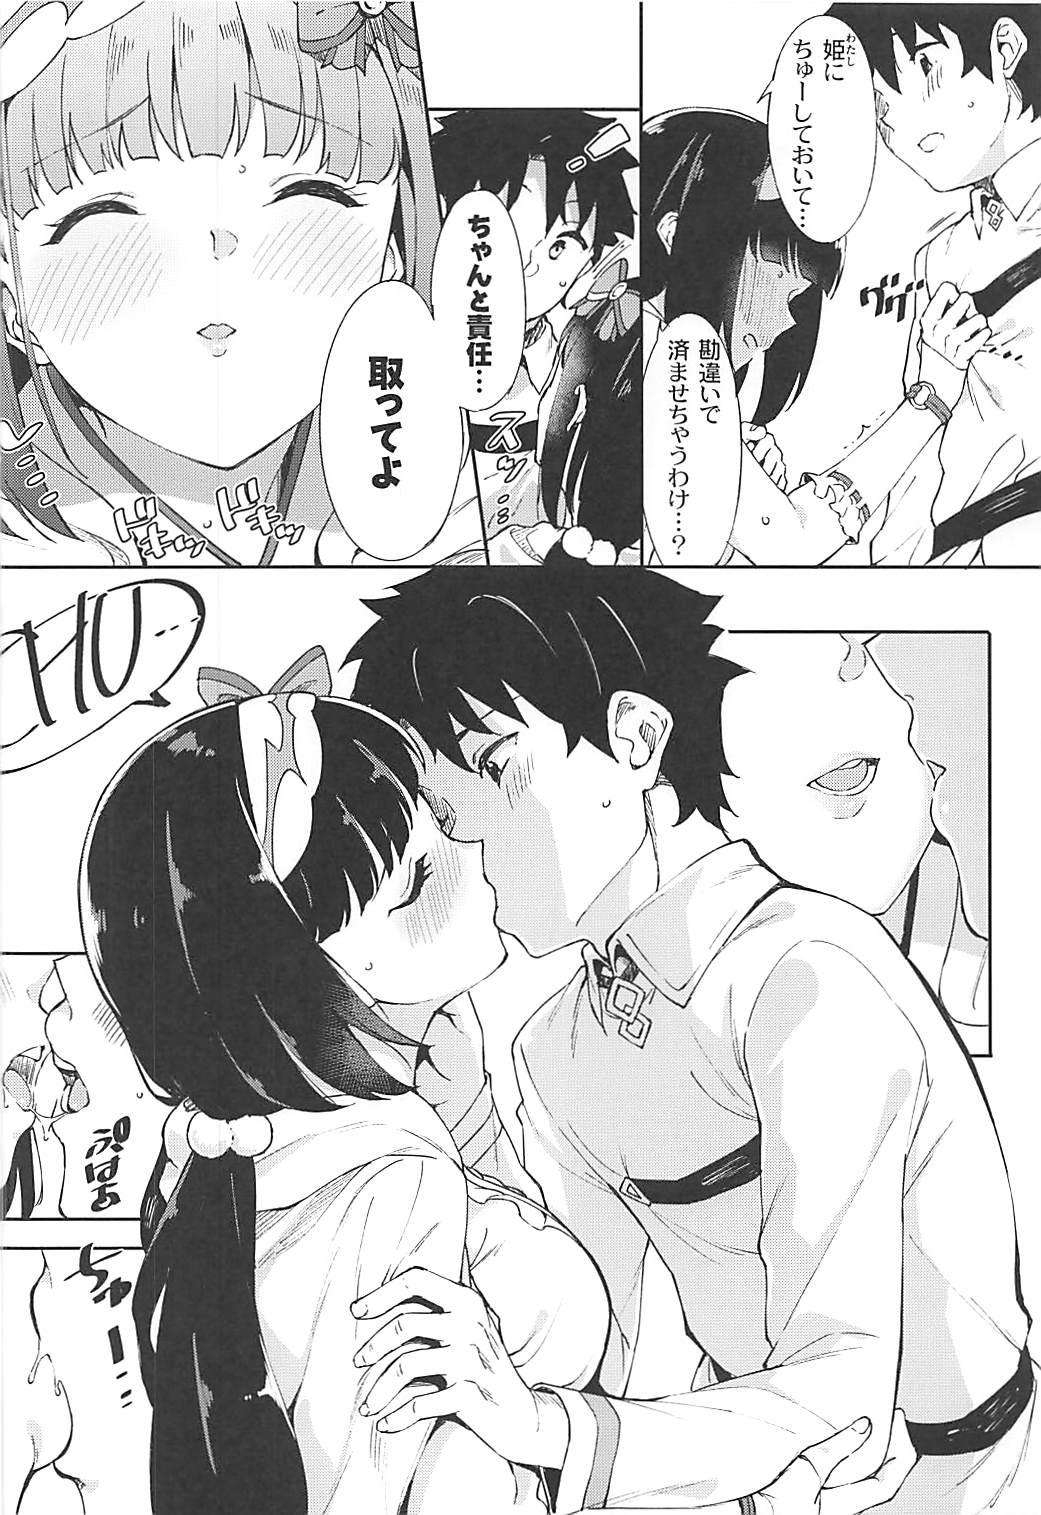 Best Blowjob Ever Osakabehime to Himegoto - Fate grand order Amateur Porn - Page 9